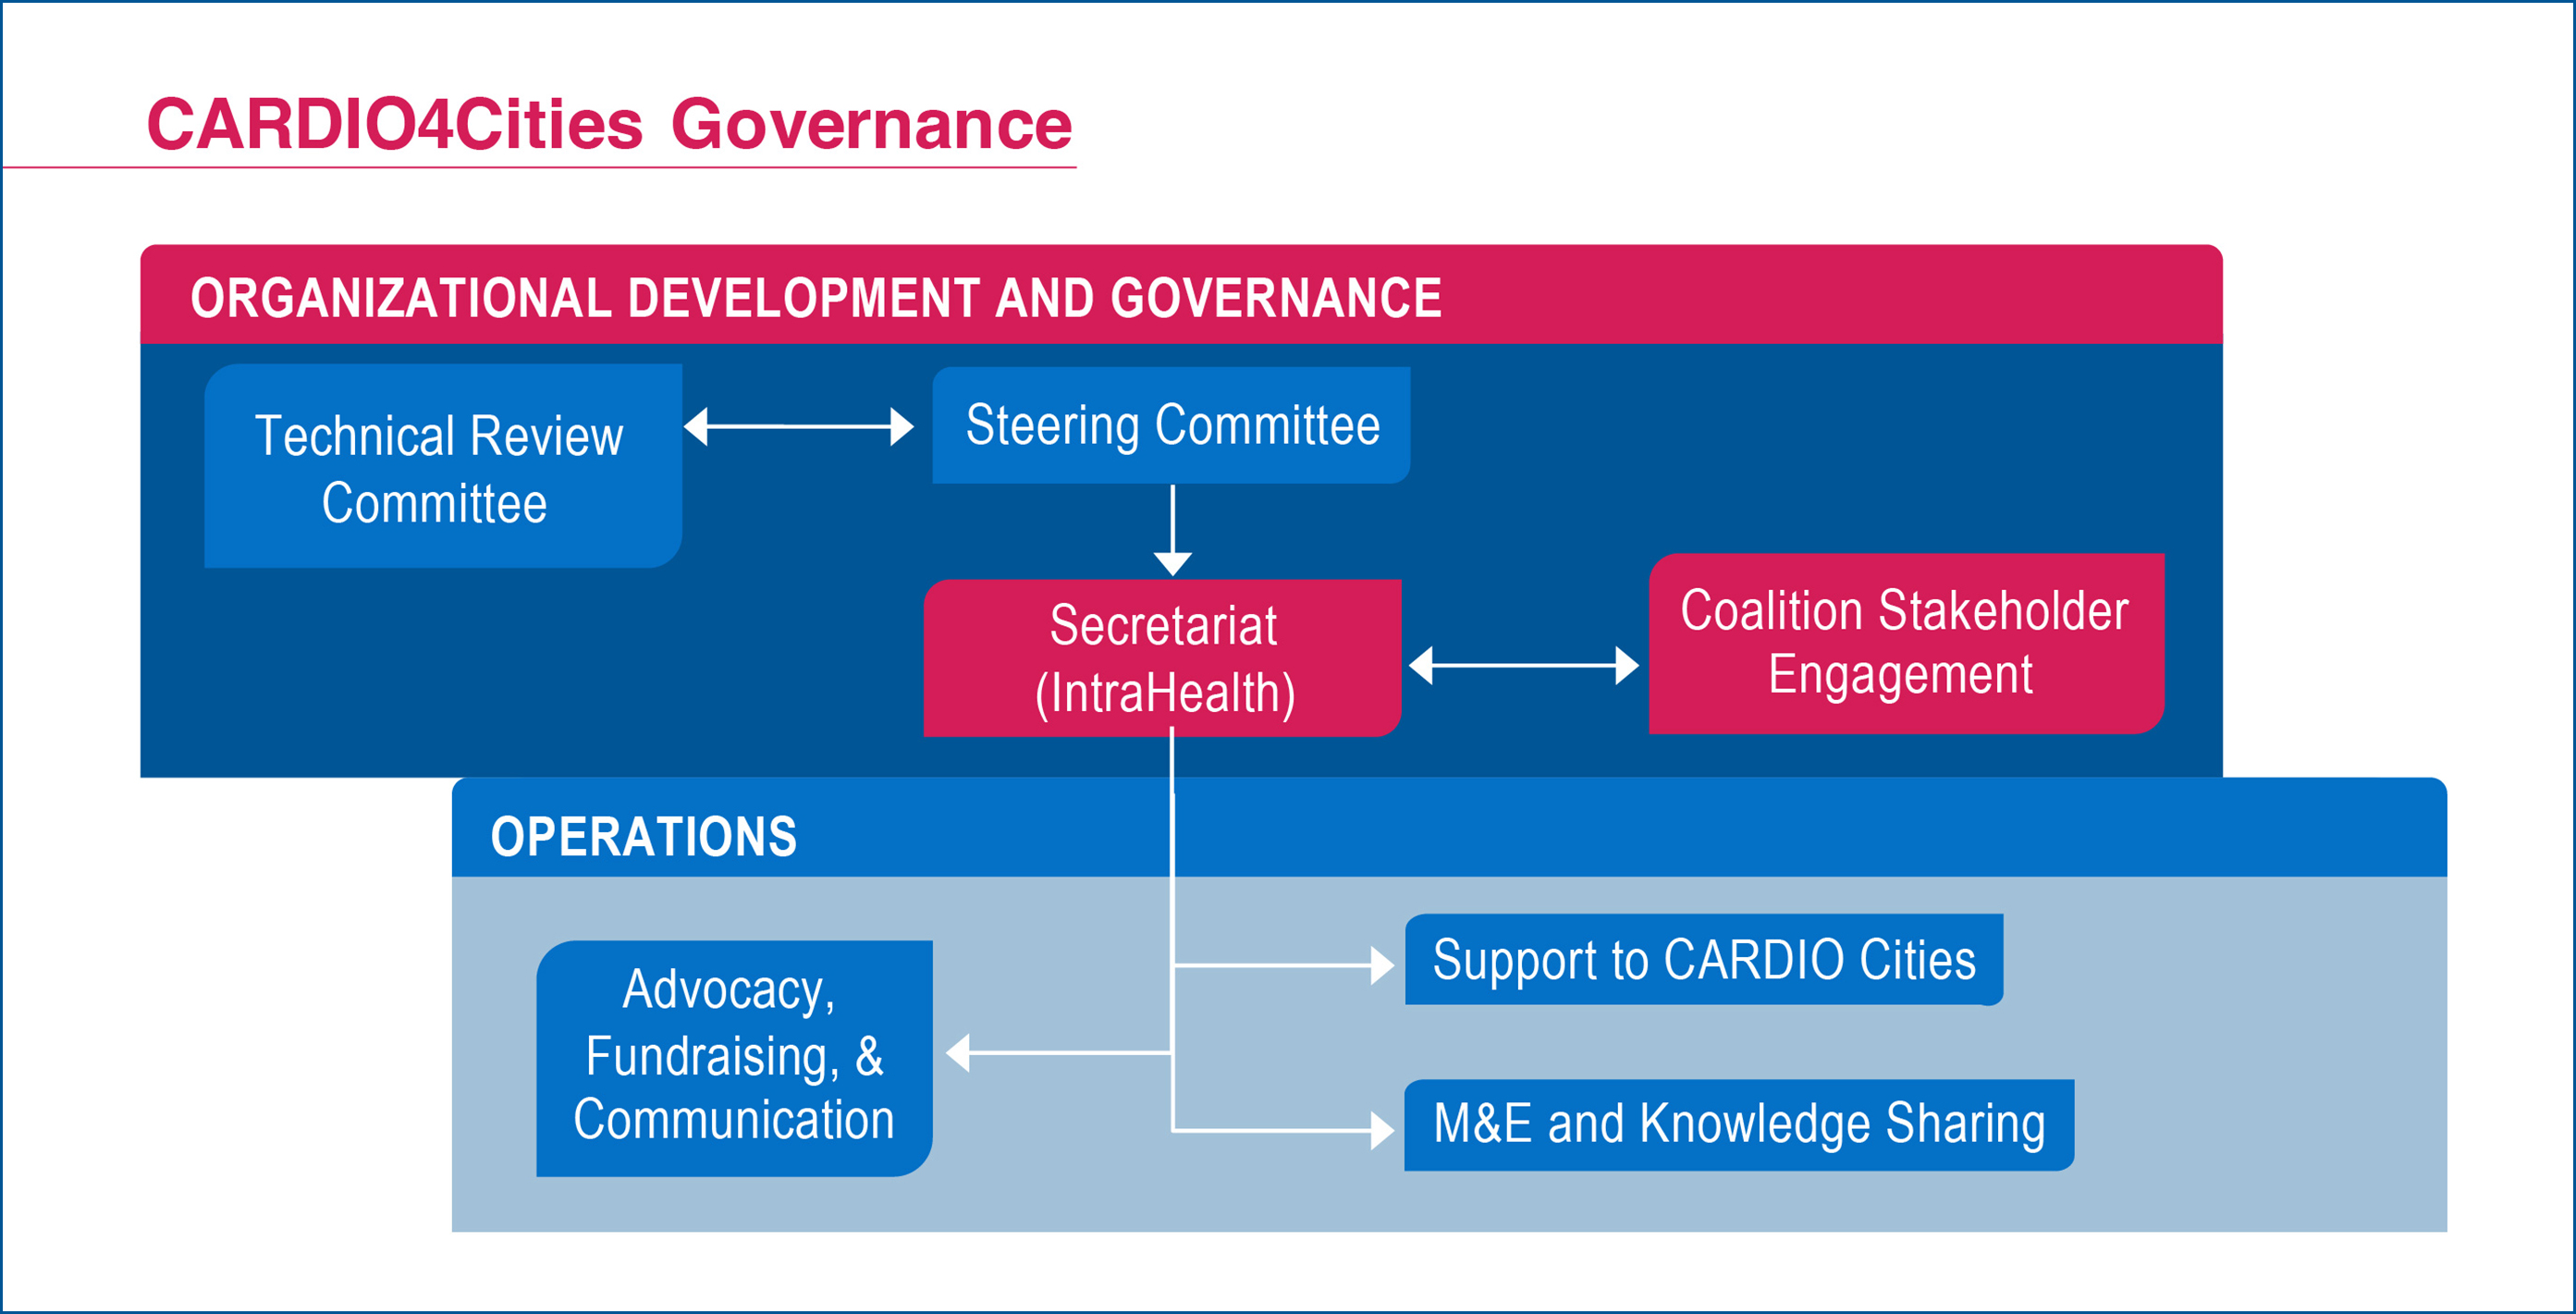 Organizational Development and Governance graphic showing the sectretariat, Intrahealth, supporting the CARDIO cities with advocacy, fundraising, communication, and M and E Knowledge.